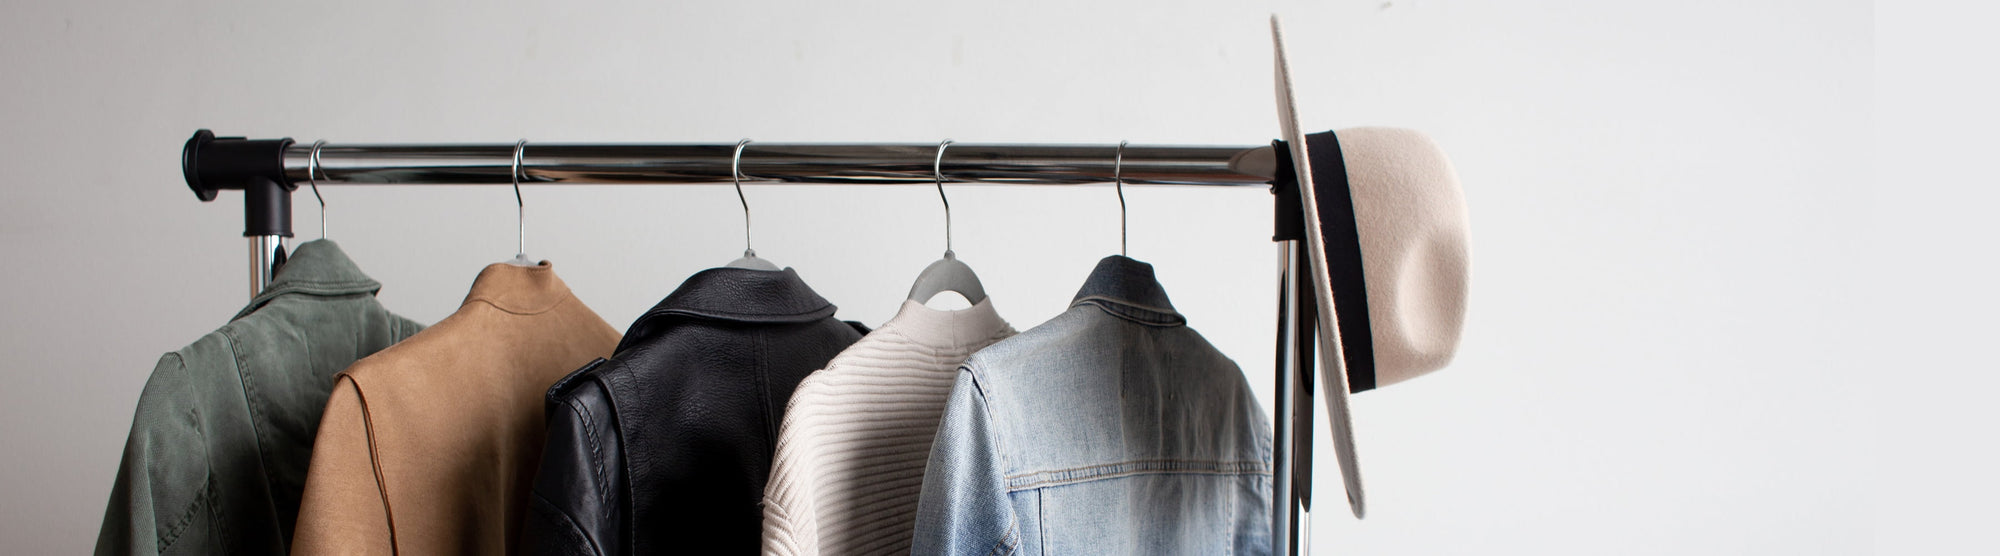 5 Ethical Clothing Brands To Update Your Wardrobe